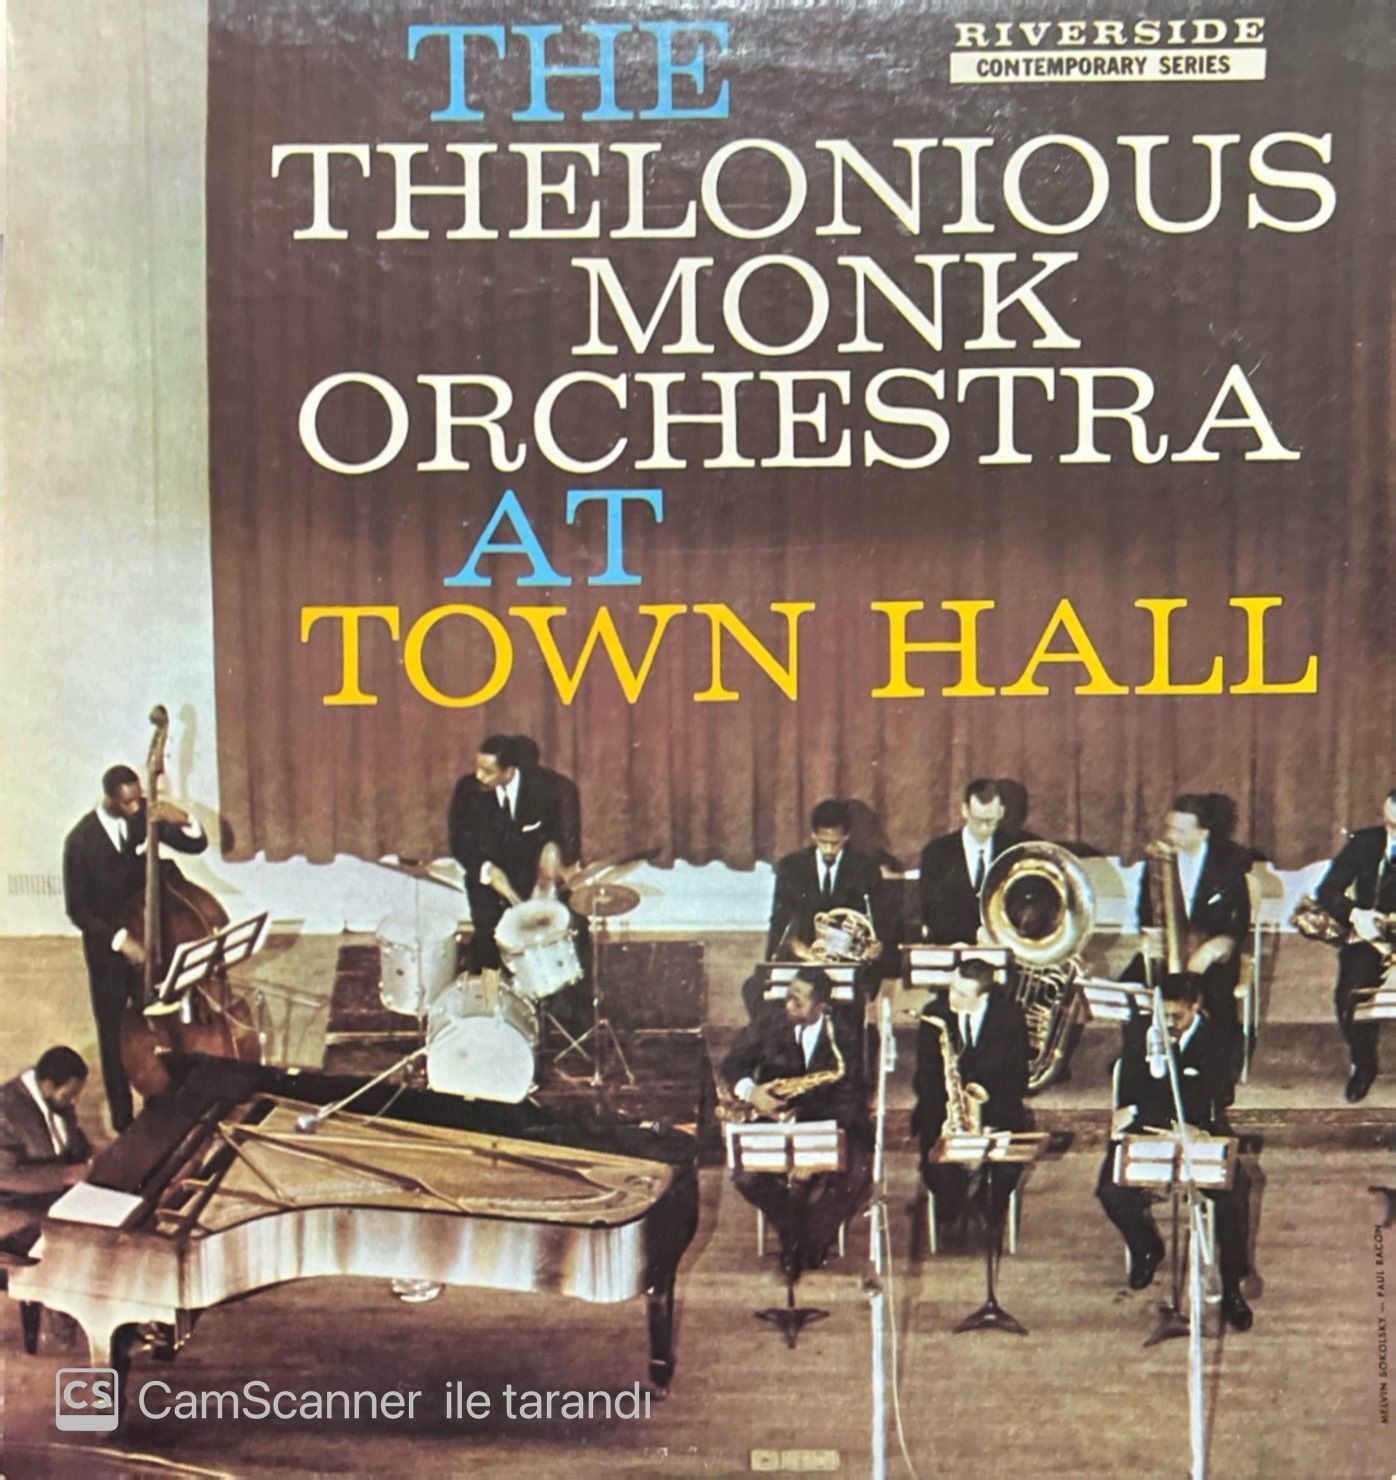 The Thelonious Monk Orchestra At Town Hall LP Plak